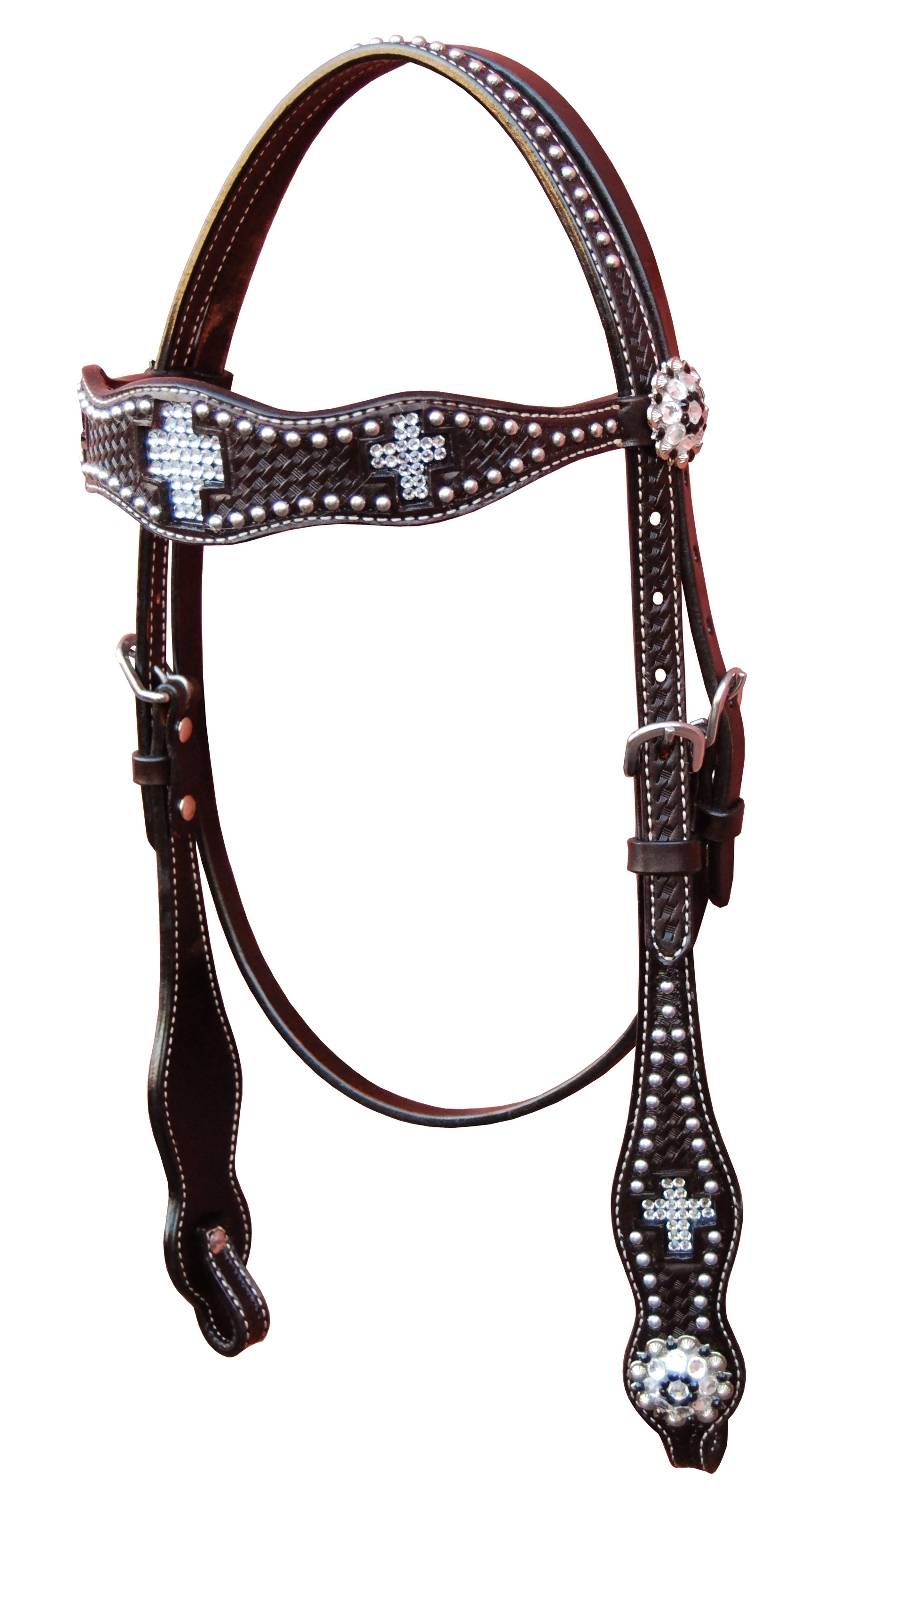 Turn-Two Browband Headstall - St. Francis